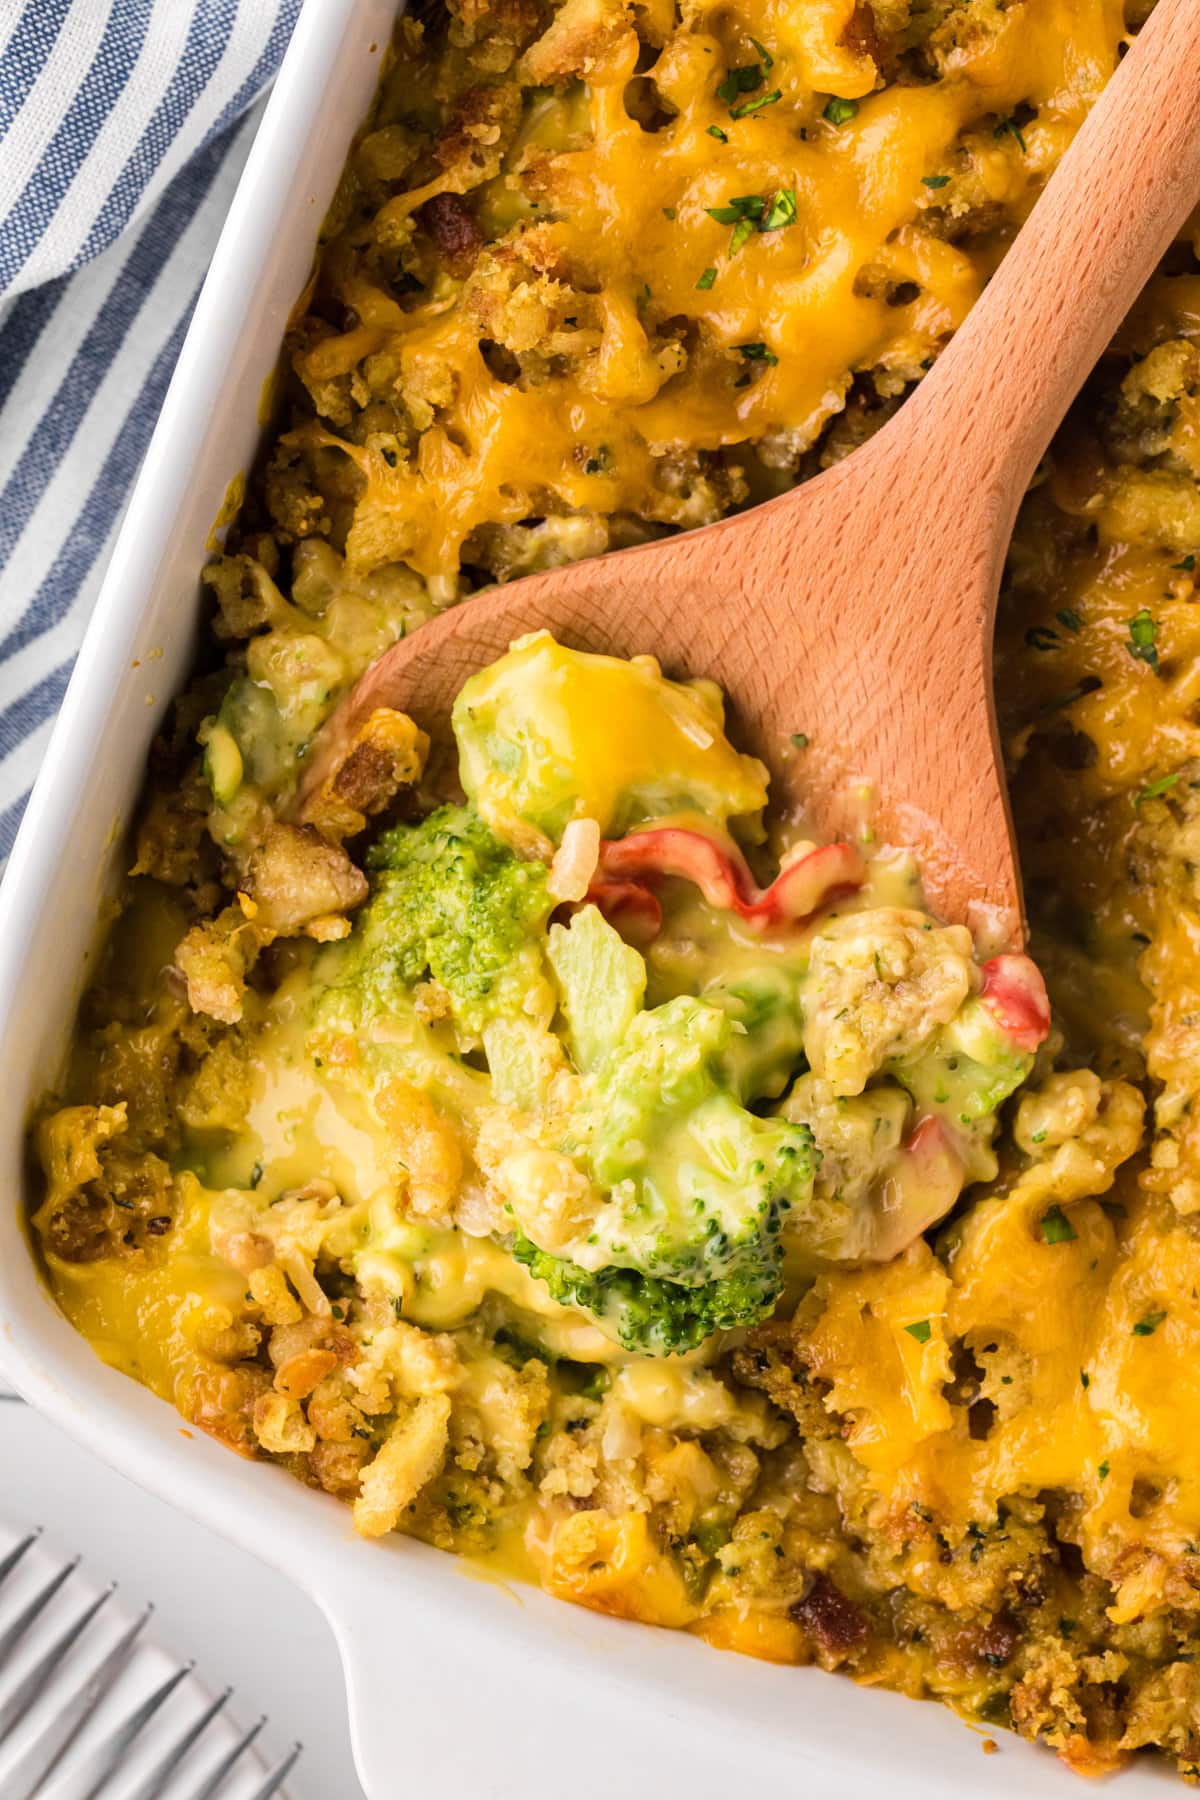 A wooden spoon scooping cheesy broccoli stuffing casserole out of a white baking dish.